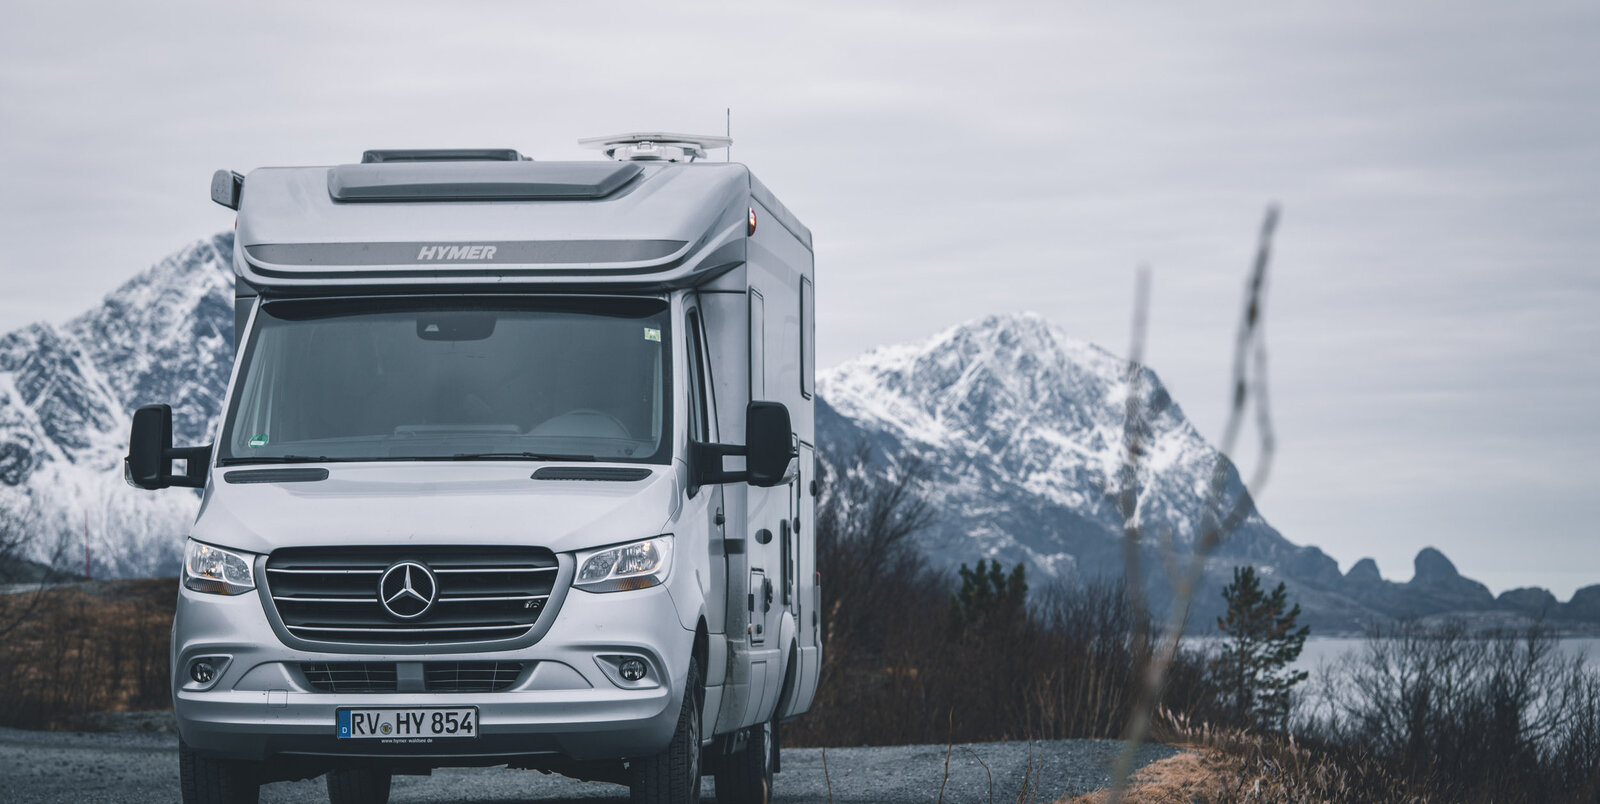 HYMER ML-T motorhome in front of snow-covered mountains and a lake on a gravel road with grasses / bushes on the hard shoulder